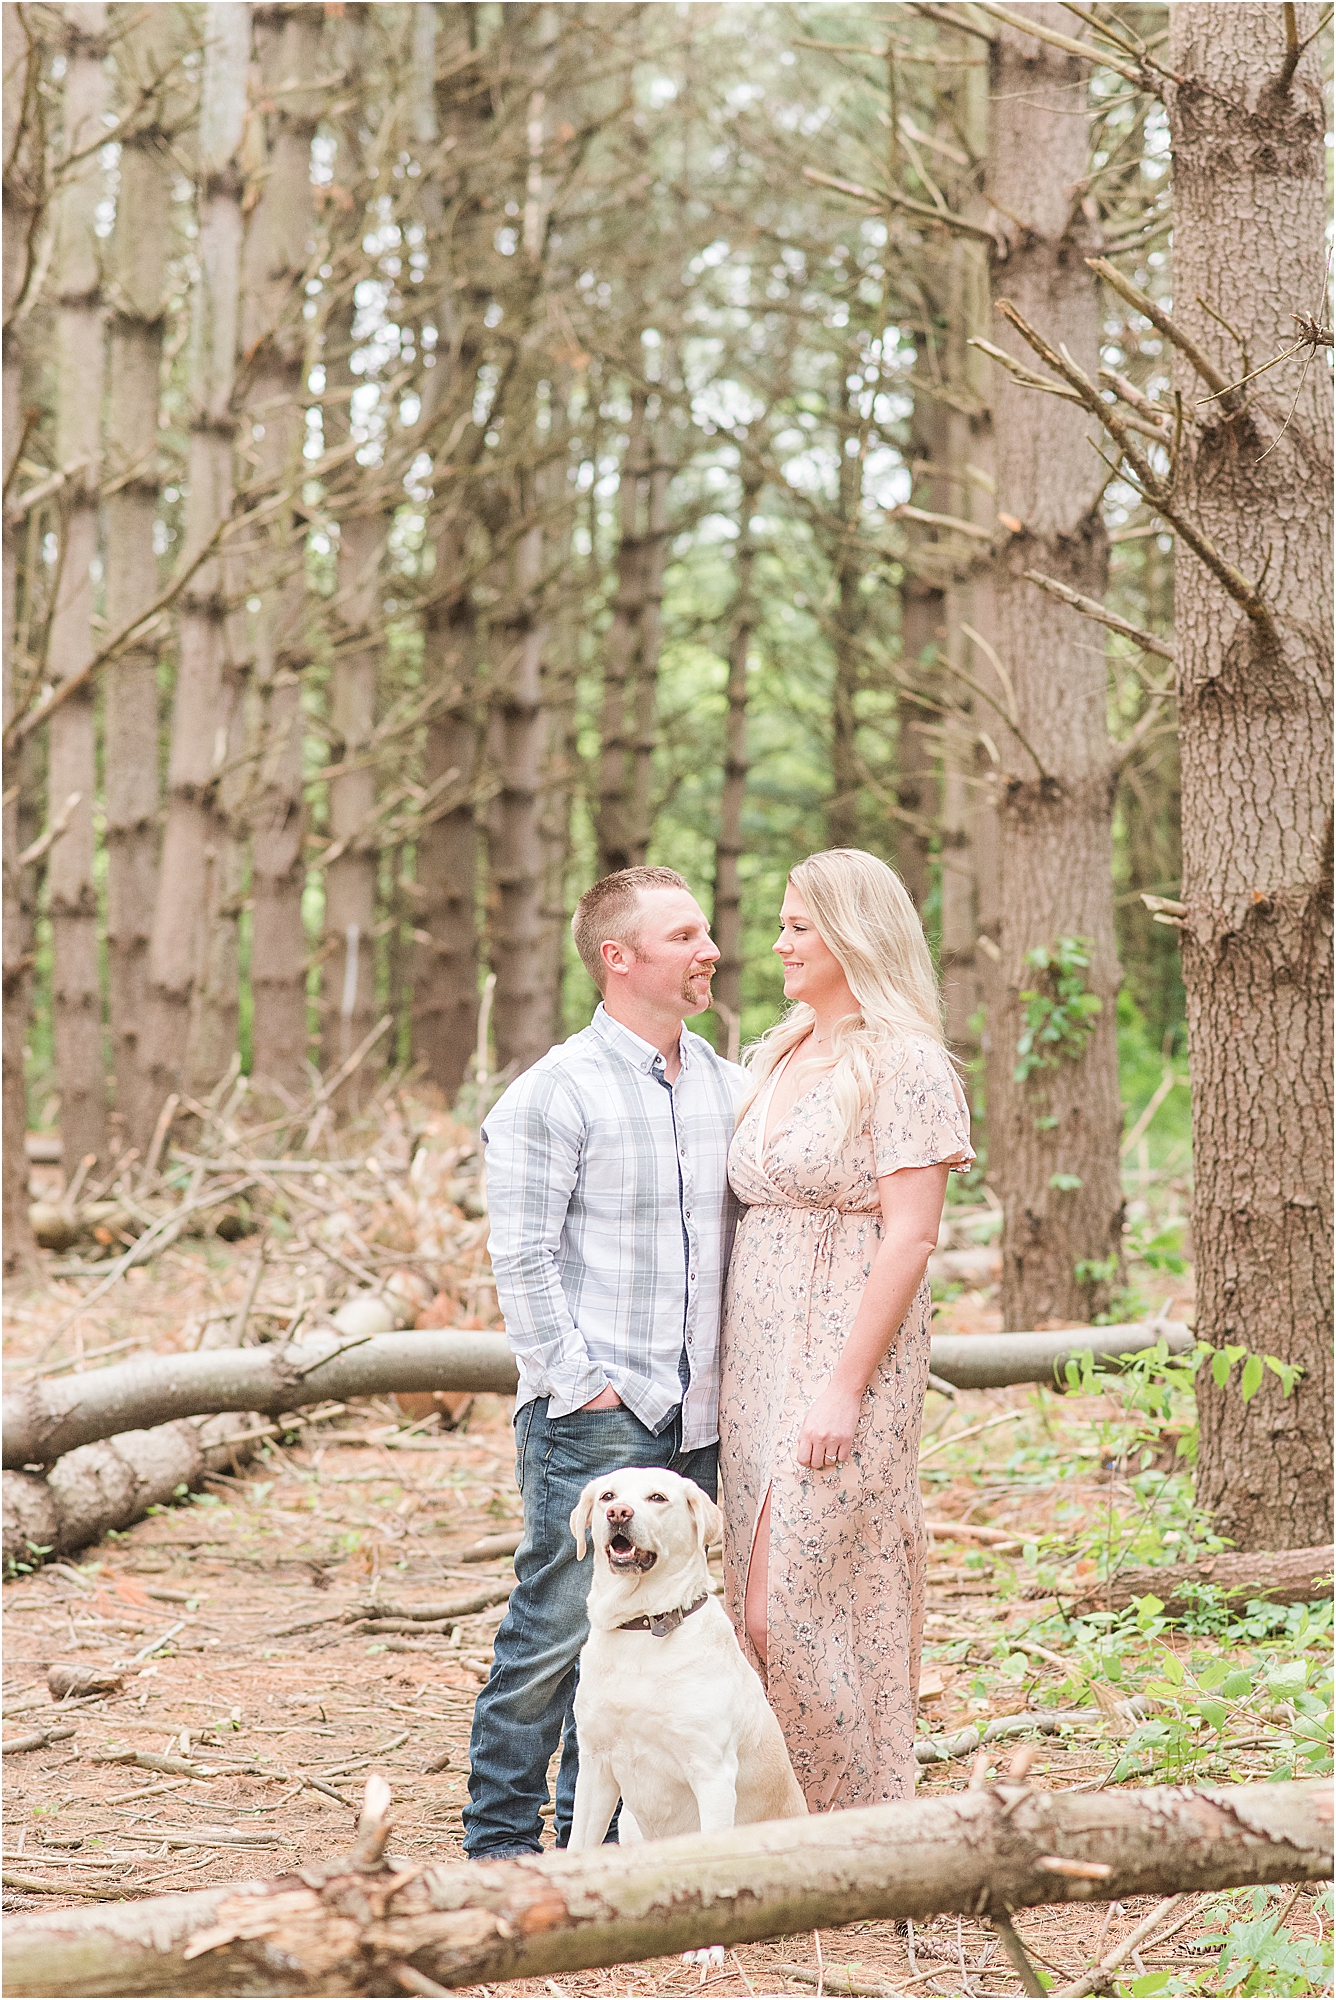 5 tips for bringing your dog to your session | Missouri wedding + family photographer | Kelsey Alumbaugh Photography | #missouriweddingphotographer #missourifamilyphotographer #midwestweddingphotographer #dogsatweddings